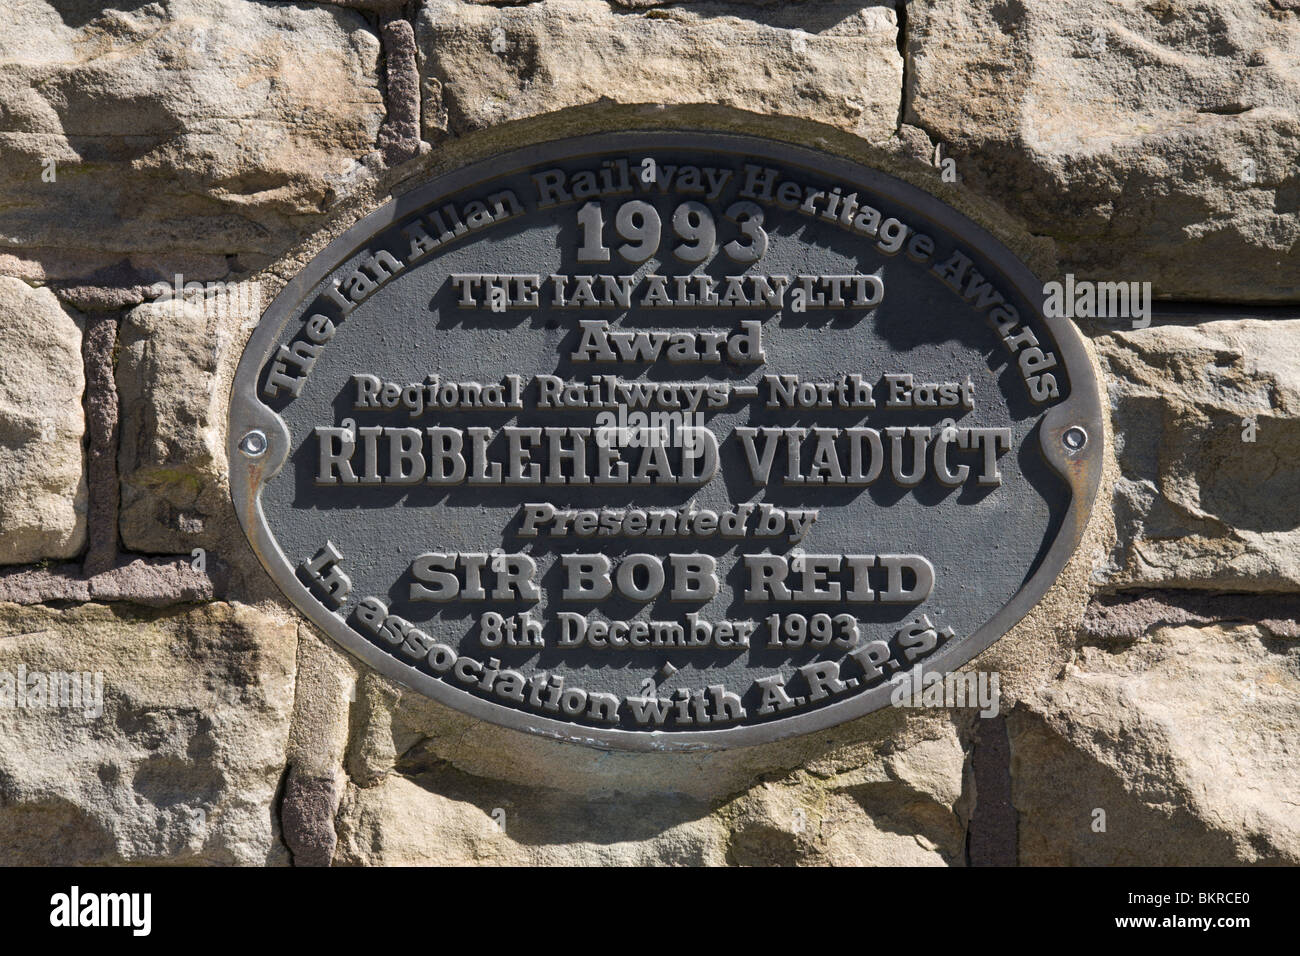 A plaque on the Ribblehead Viaduct Monument, Yorkshire Dales, England. Stock Photo